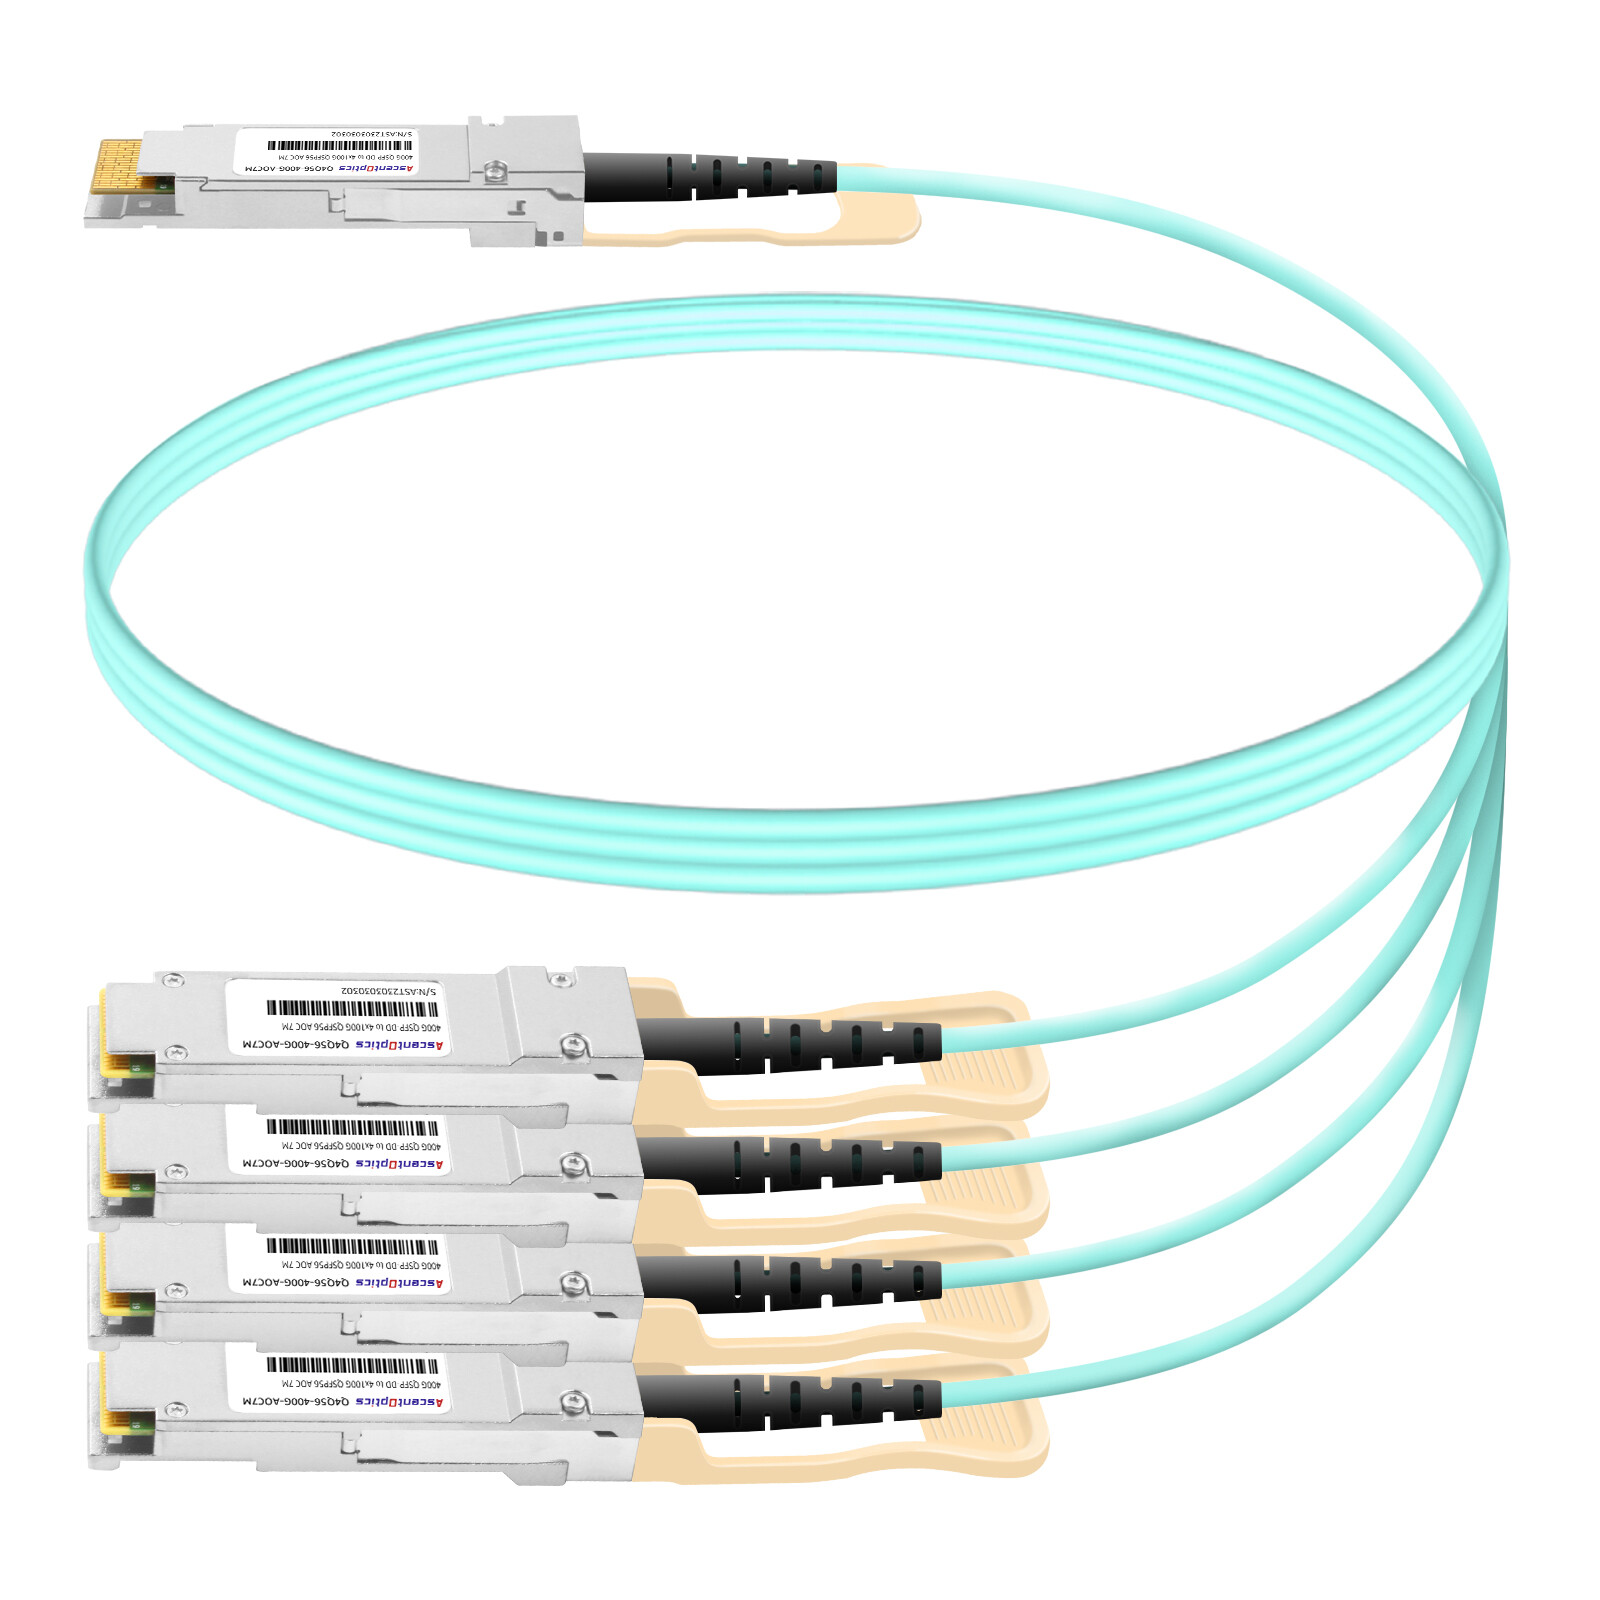 400G QSFP-DD to 4x 100G QSFP56 Breakout AOC Cable,7 Meters